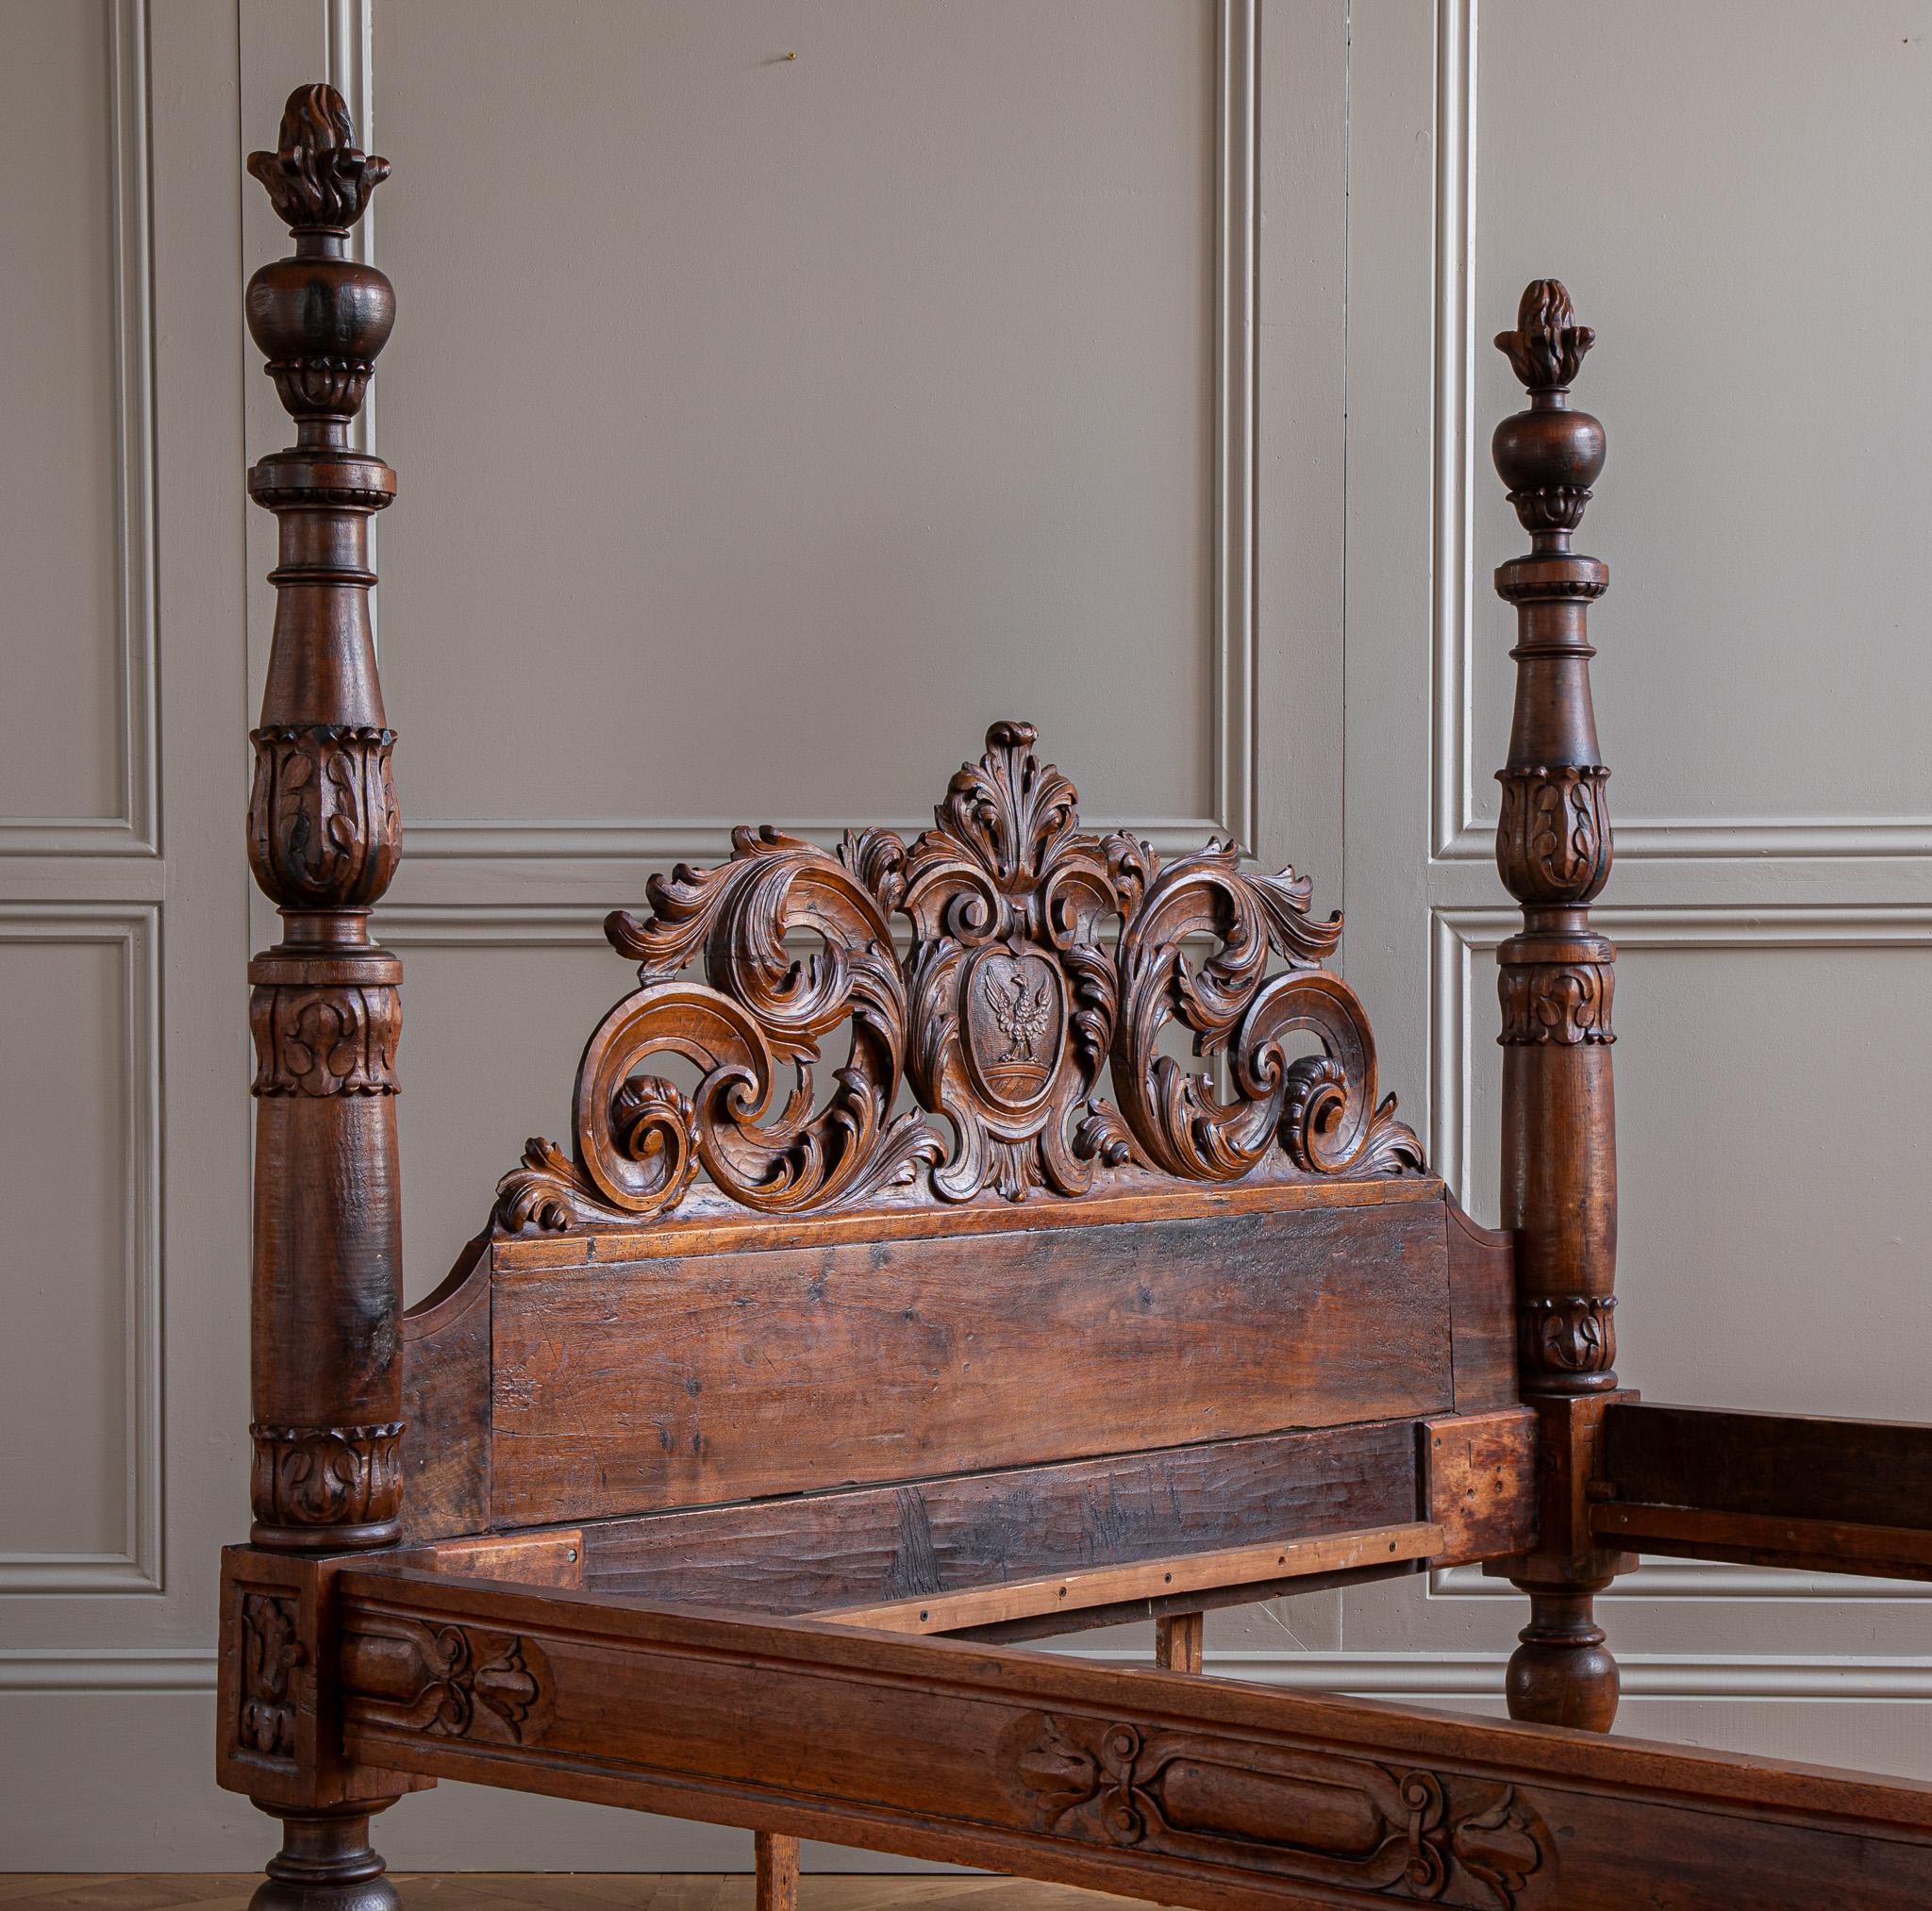 Hand-Carved Circa Mid 1800's Italian Baroque Style Four Poster Bed In Carved Walnut For Sale